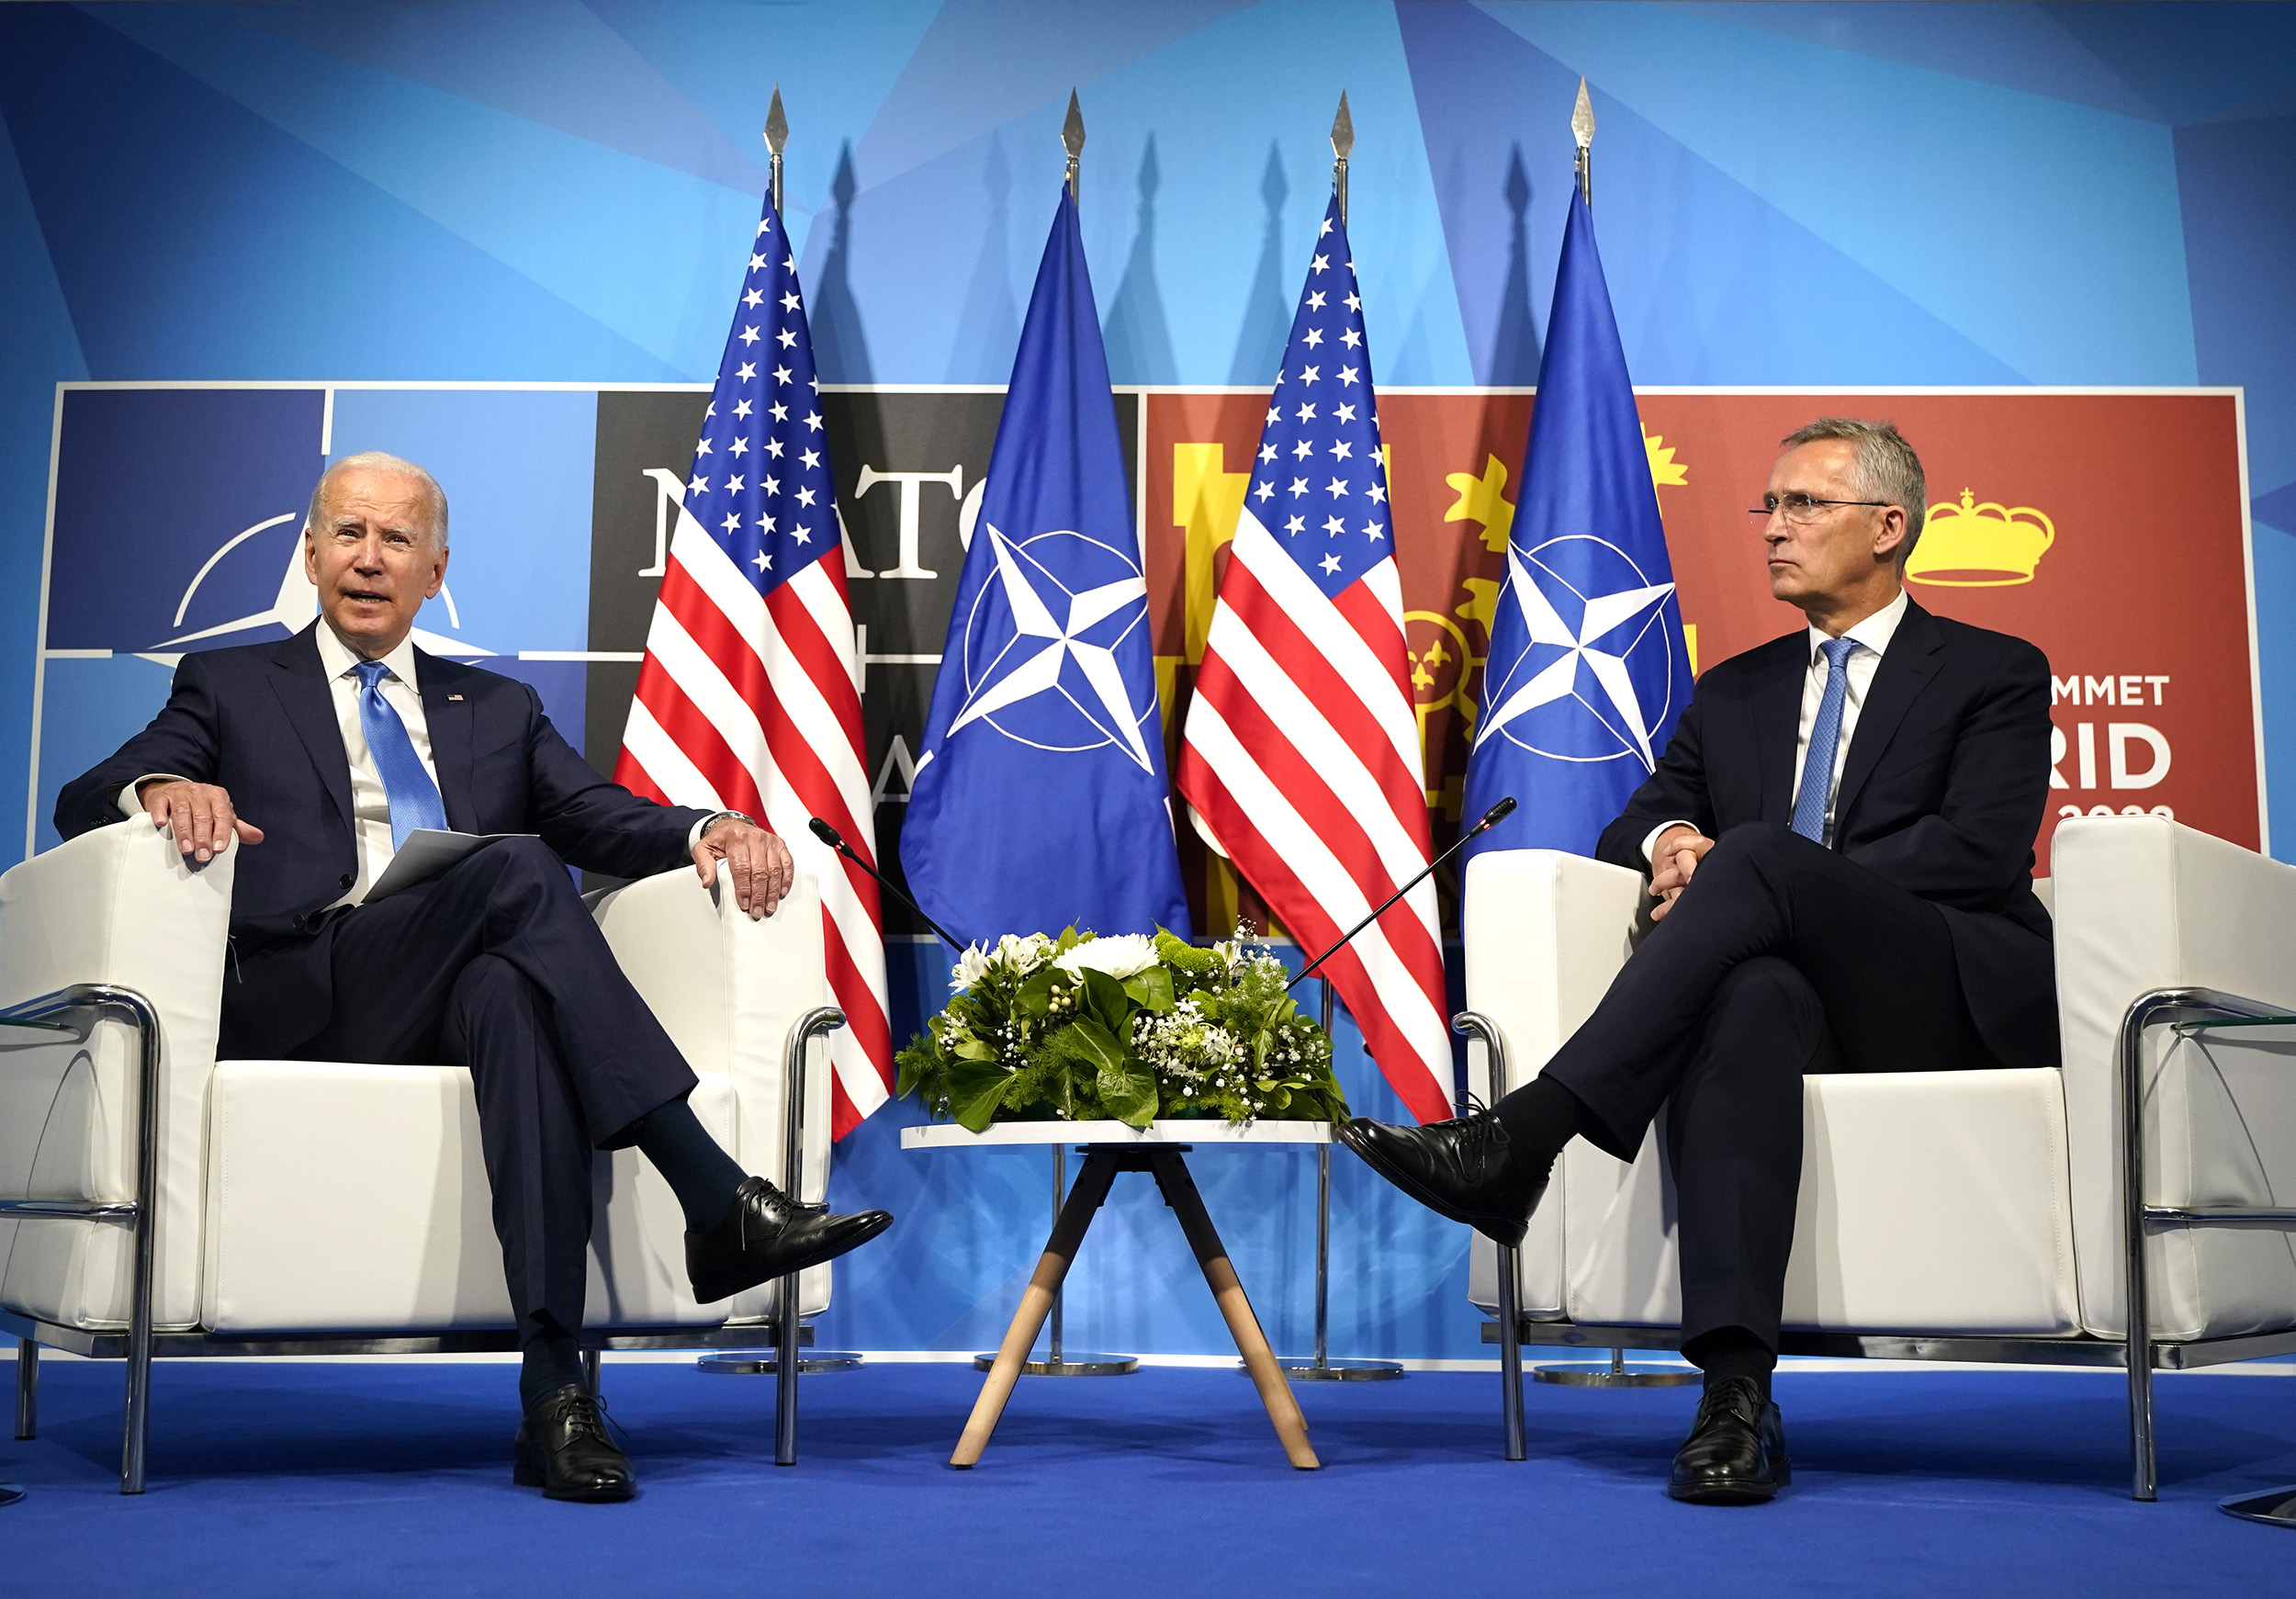 US President Joe Biden, left, pictured with NATO Secretary General Jens Stoltenberg during a meeting at the NATO summit in Madrid, Spain on June 29.